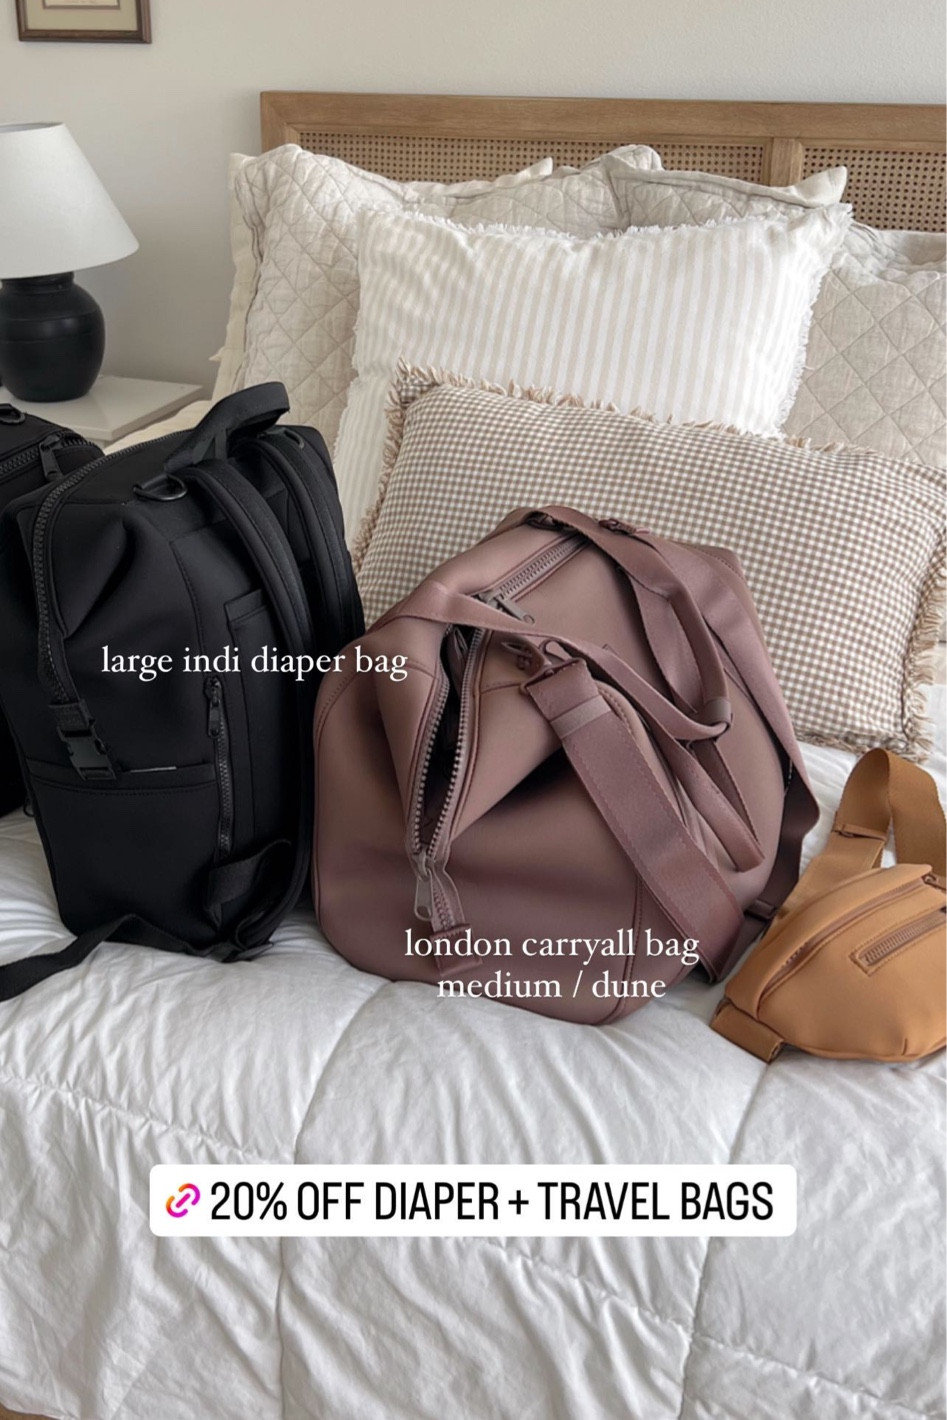 Dagne Dover Landon Carryall Small, Medium and Large Size Comparison 